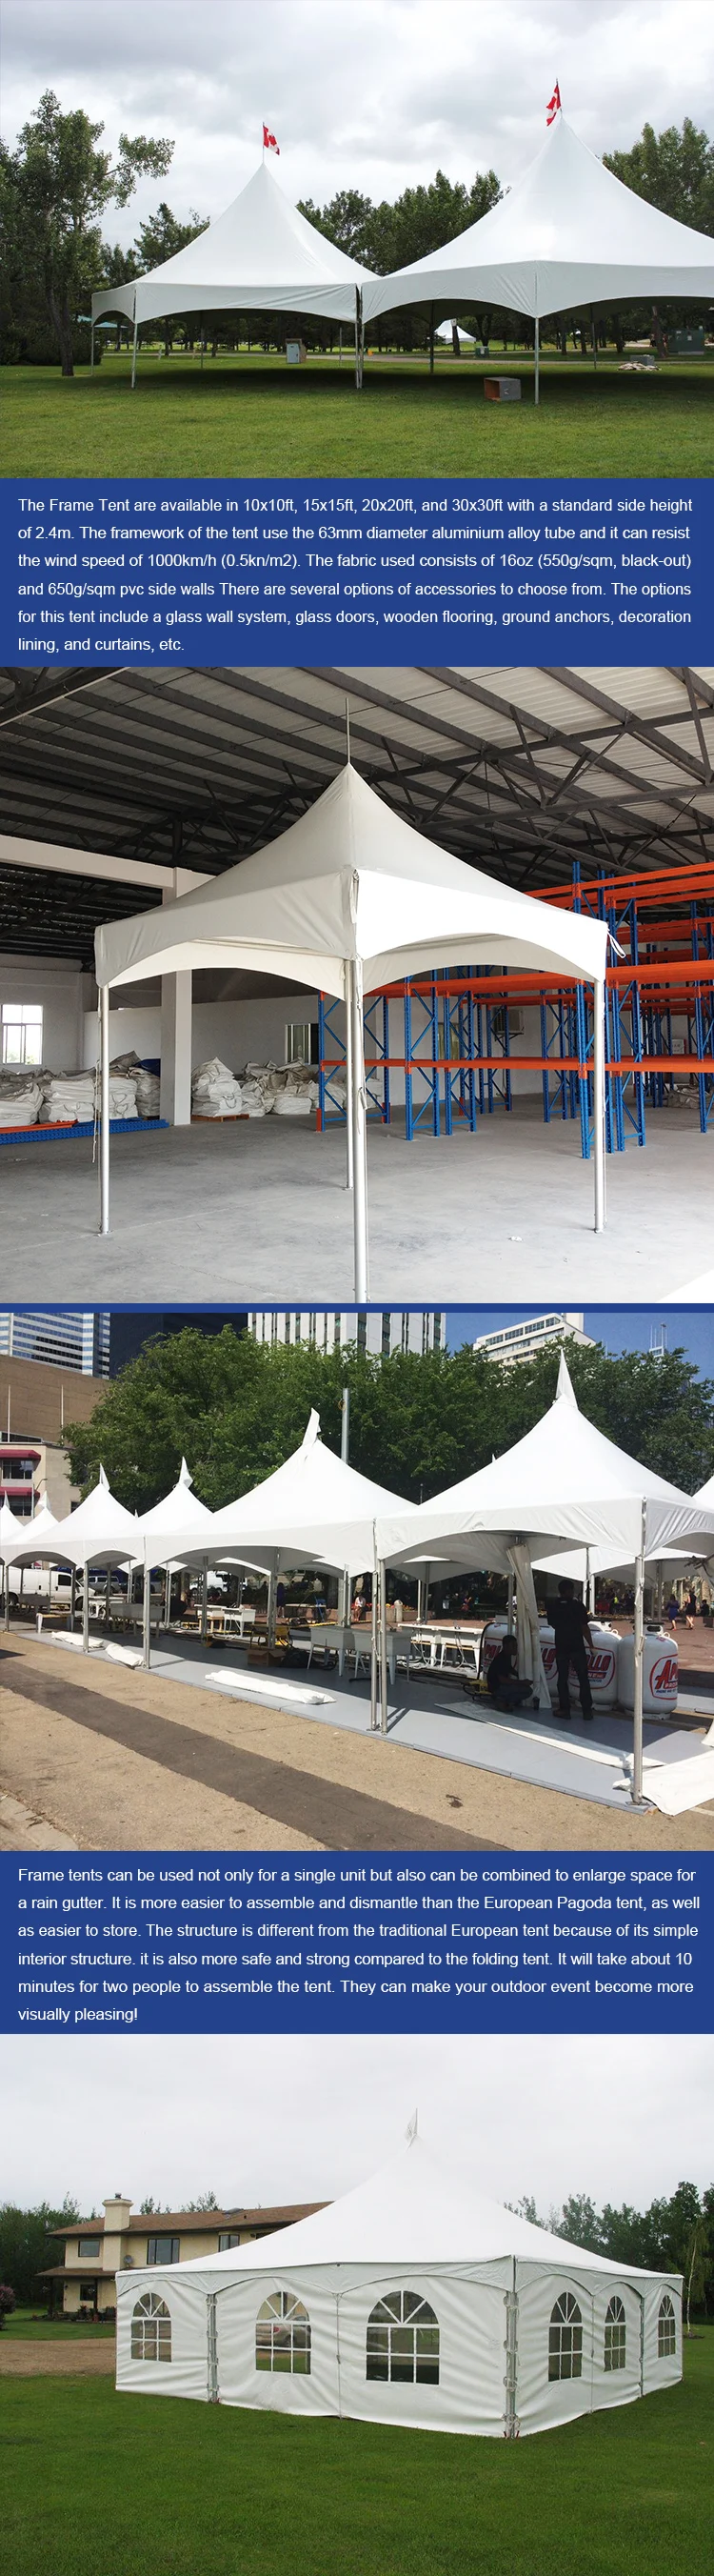 COSCO High Peak Marquee Party Event Tent Temporary House Aluminum Frame Tent With Clear Window